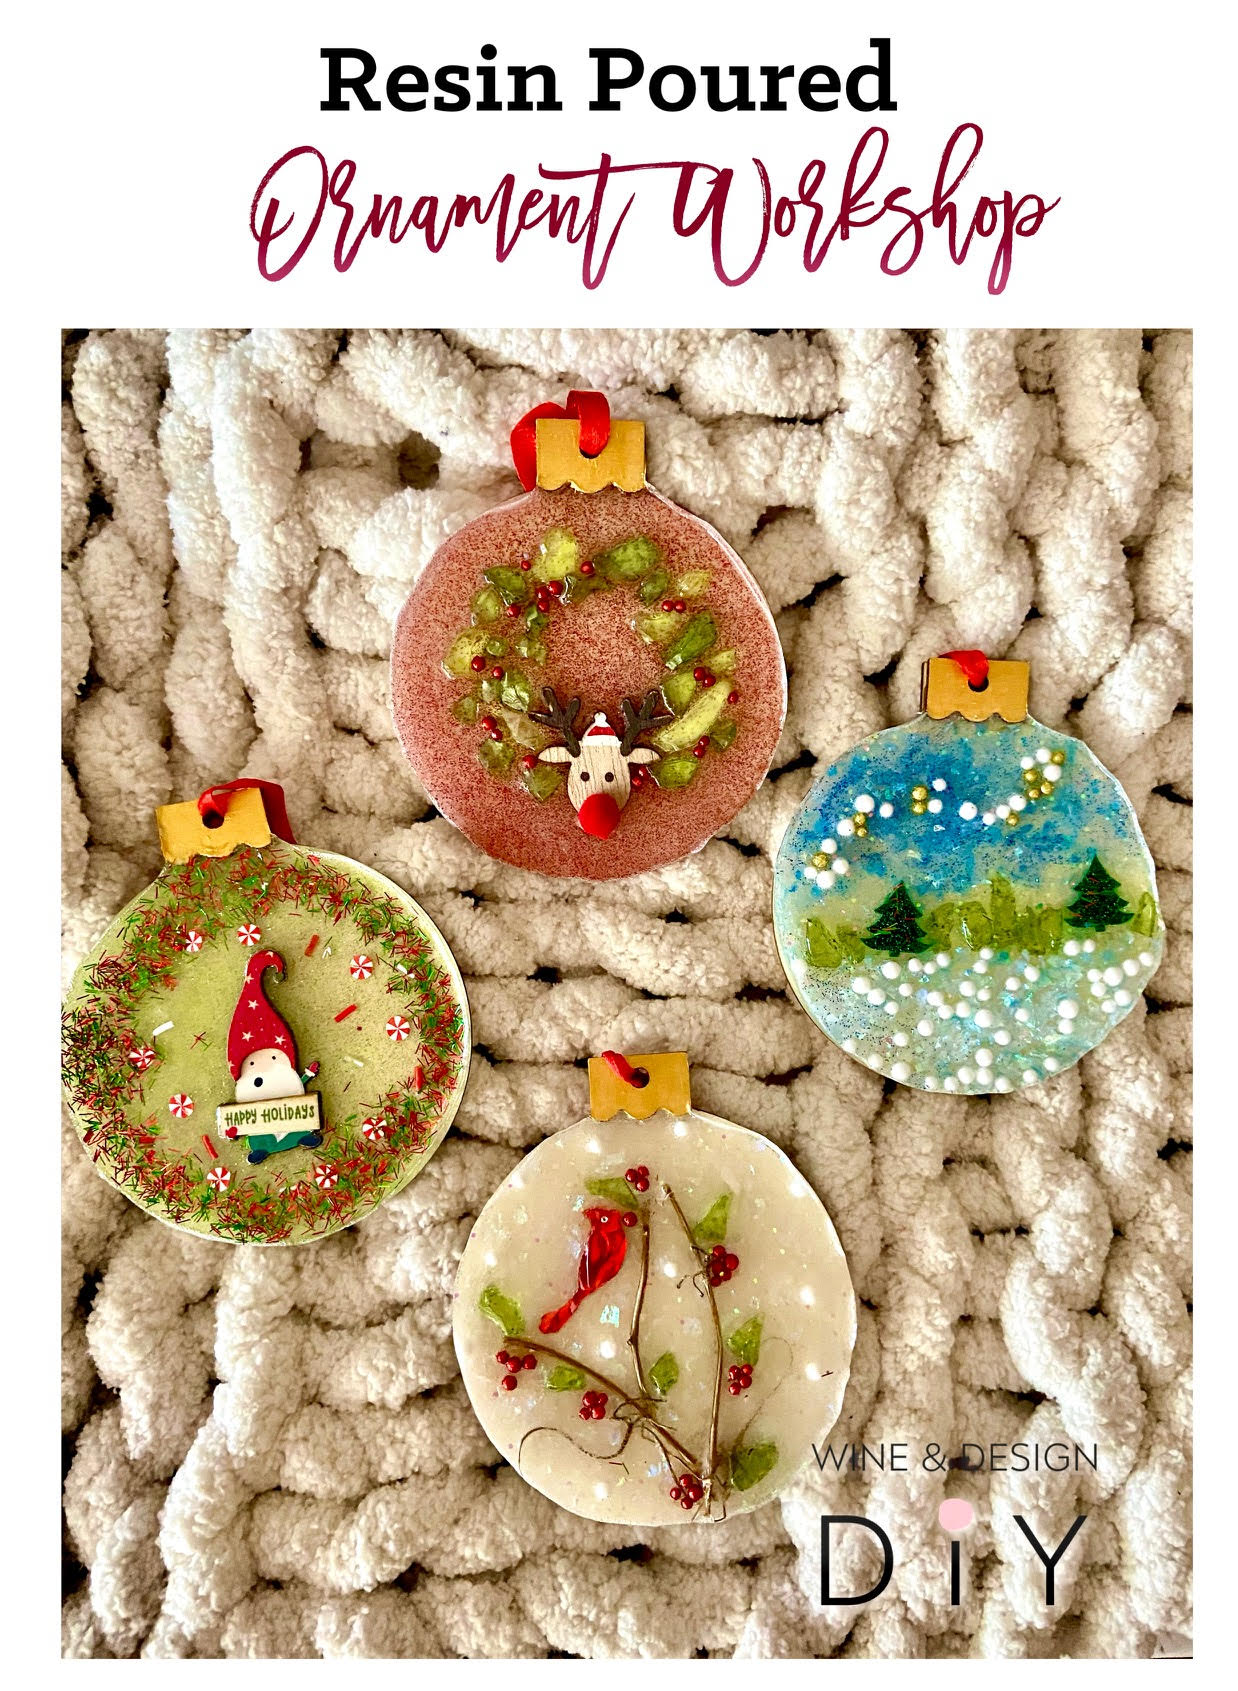  Resin Poured Ornament Workshop | Set of 4 Ornaments - Choice of Globe or Star Shaped Ornaments | Based on Availability